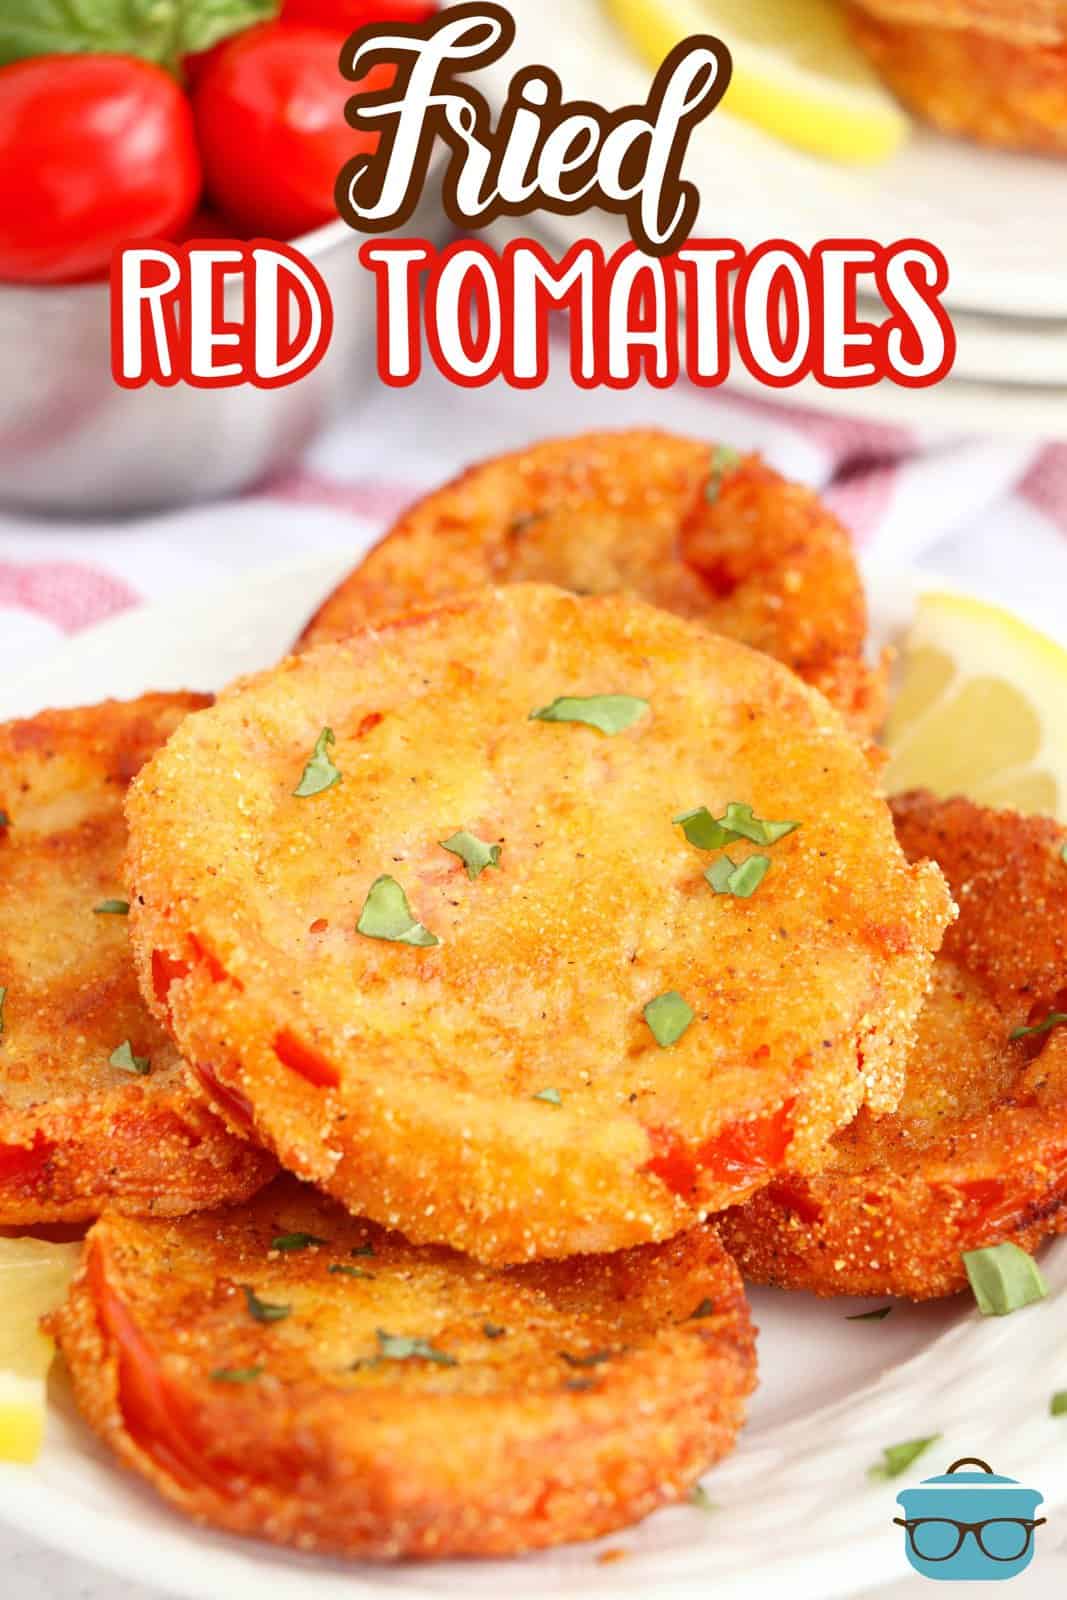 A few Fried Red Tomatoes in a pile on a plate.